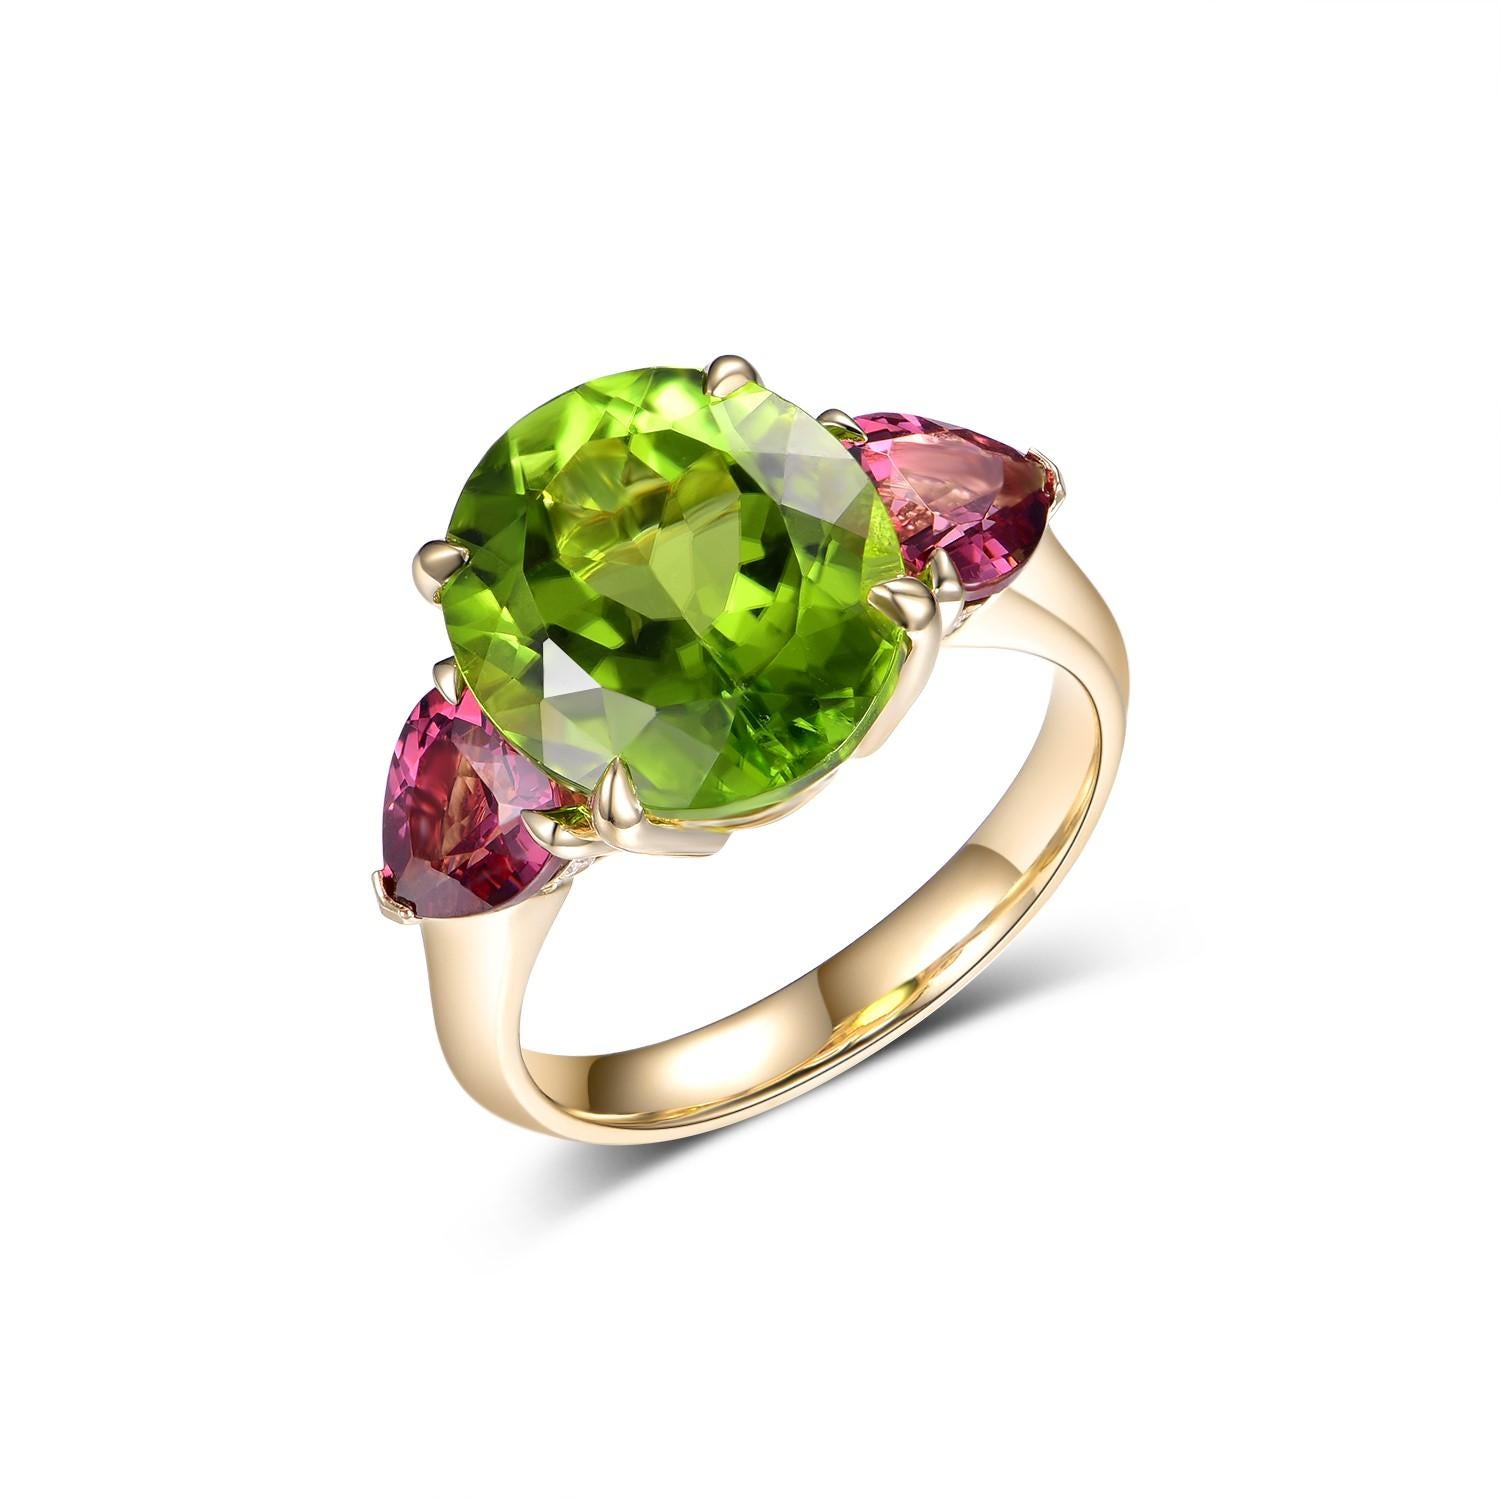 This exquisite ring features a captivating peridot as its centerpiece, weighing a substantial 7.08 carats. The peridot boasts a vibrant, grassy green hue that gleams with an internal fire, its facets catching the light to showcase the gemstone's